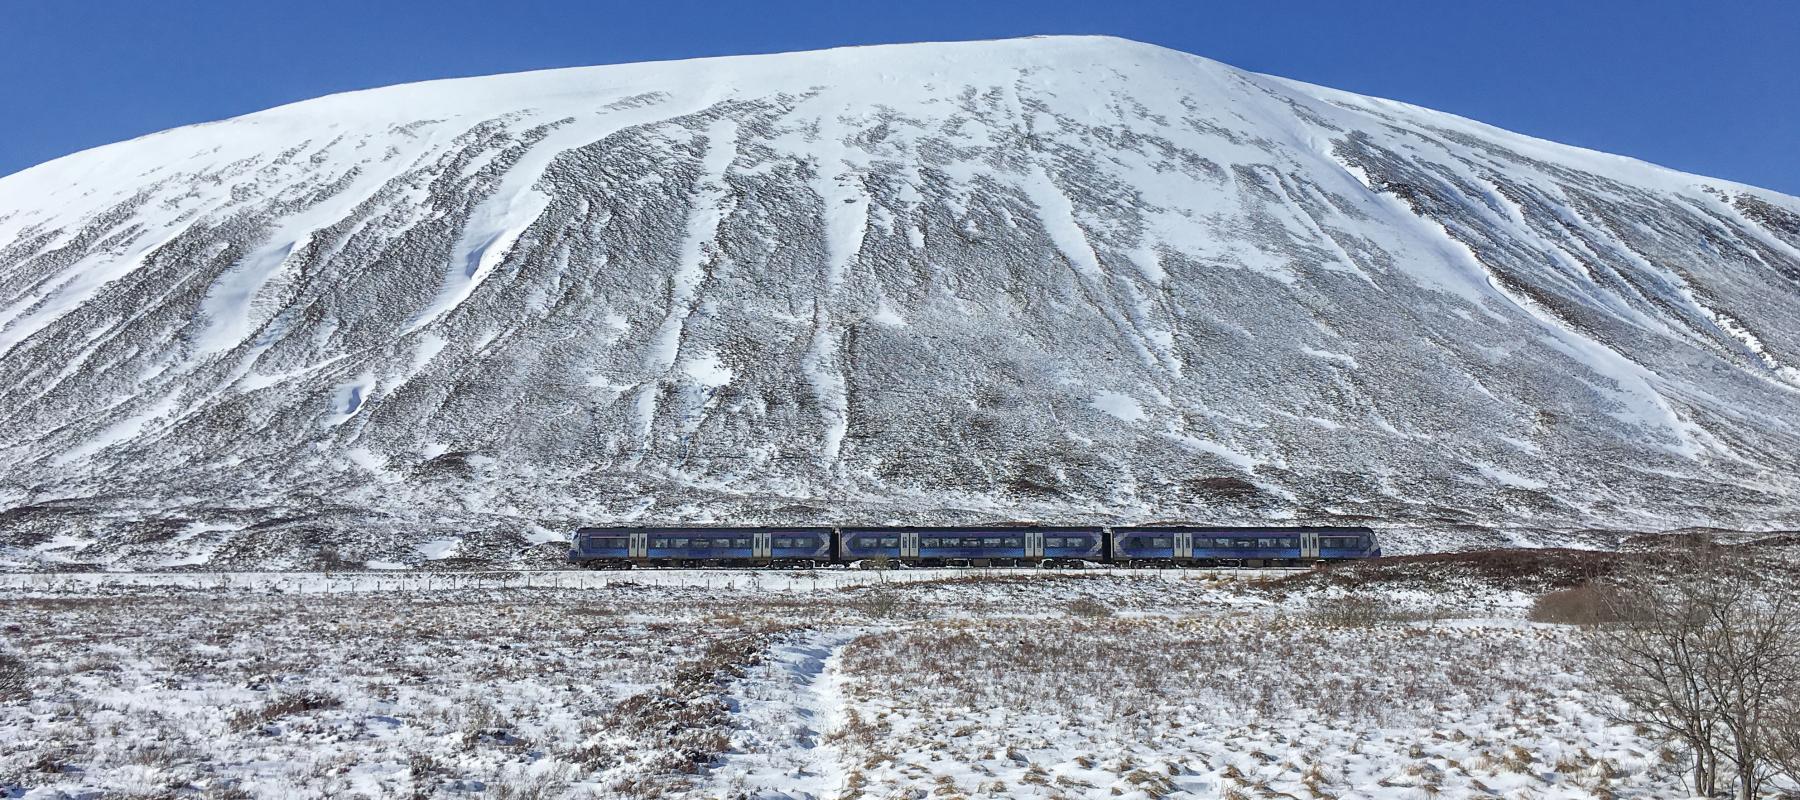 Highland Main Line in the snow. Photo: Jules Akel